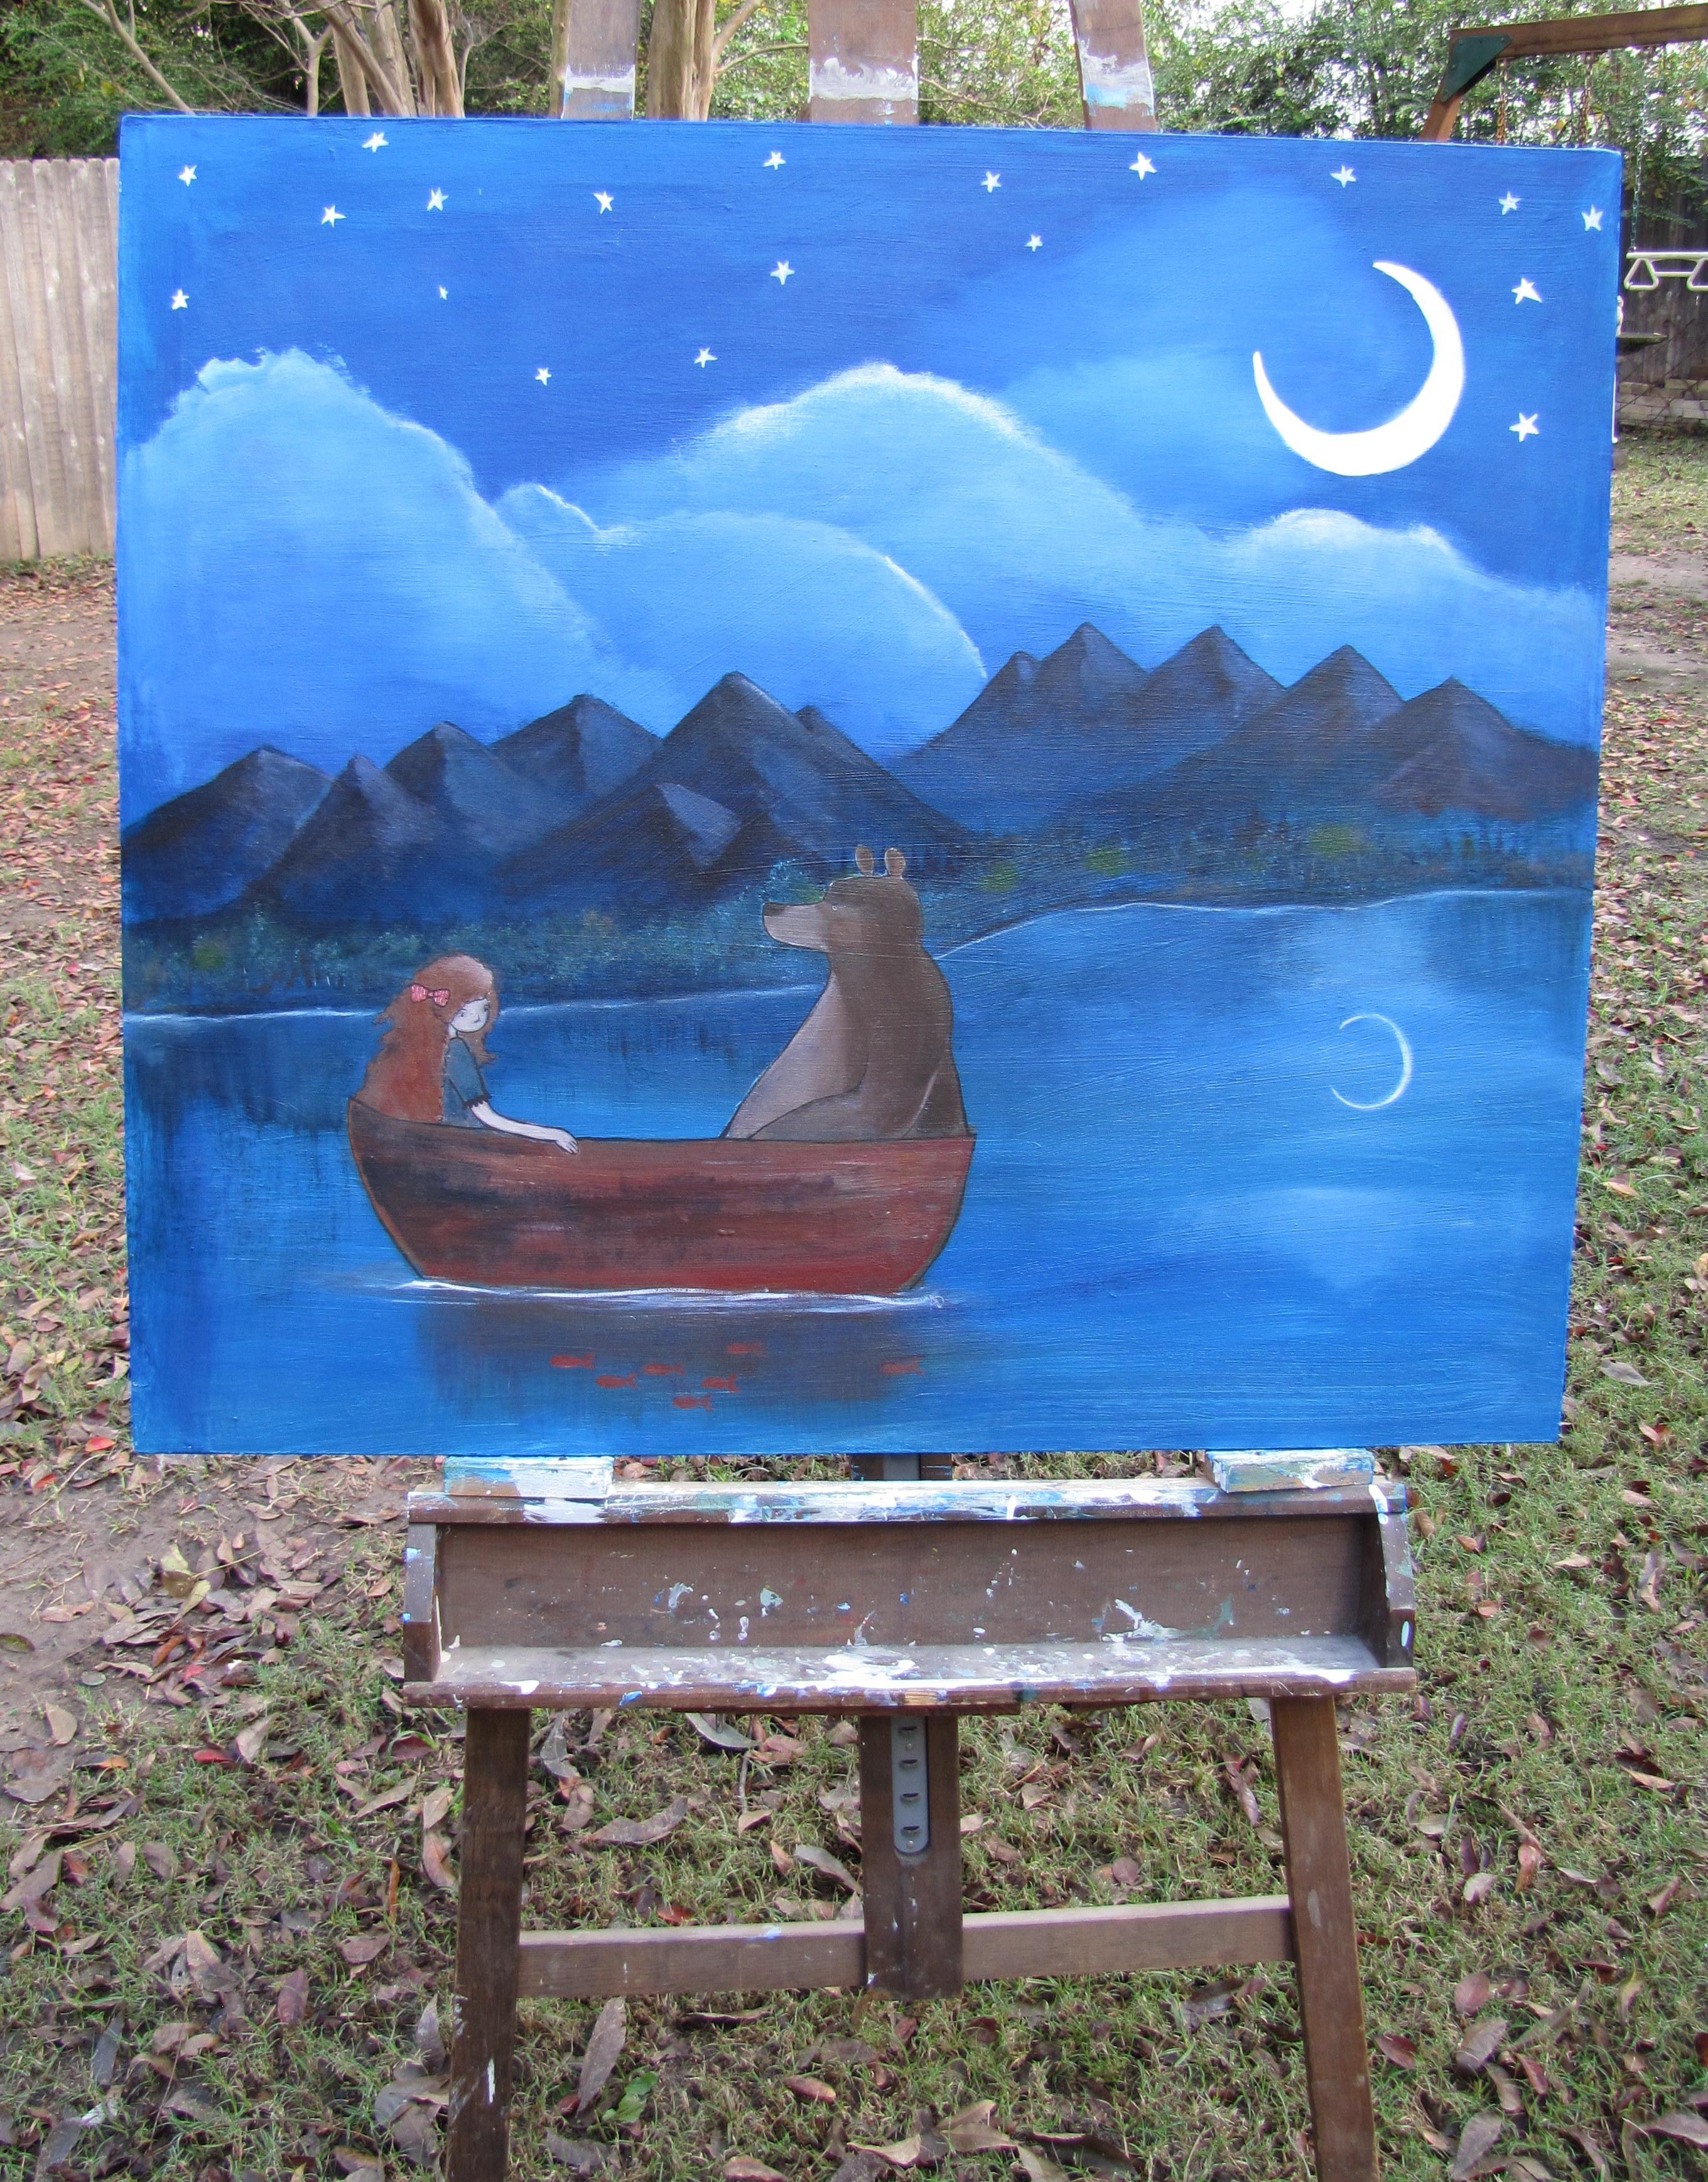 The Moonlit Lake Andrea Doss Acrylic painting on stretched canvas 1